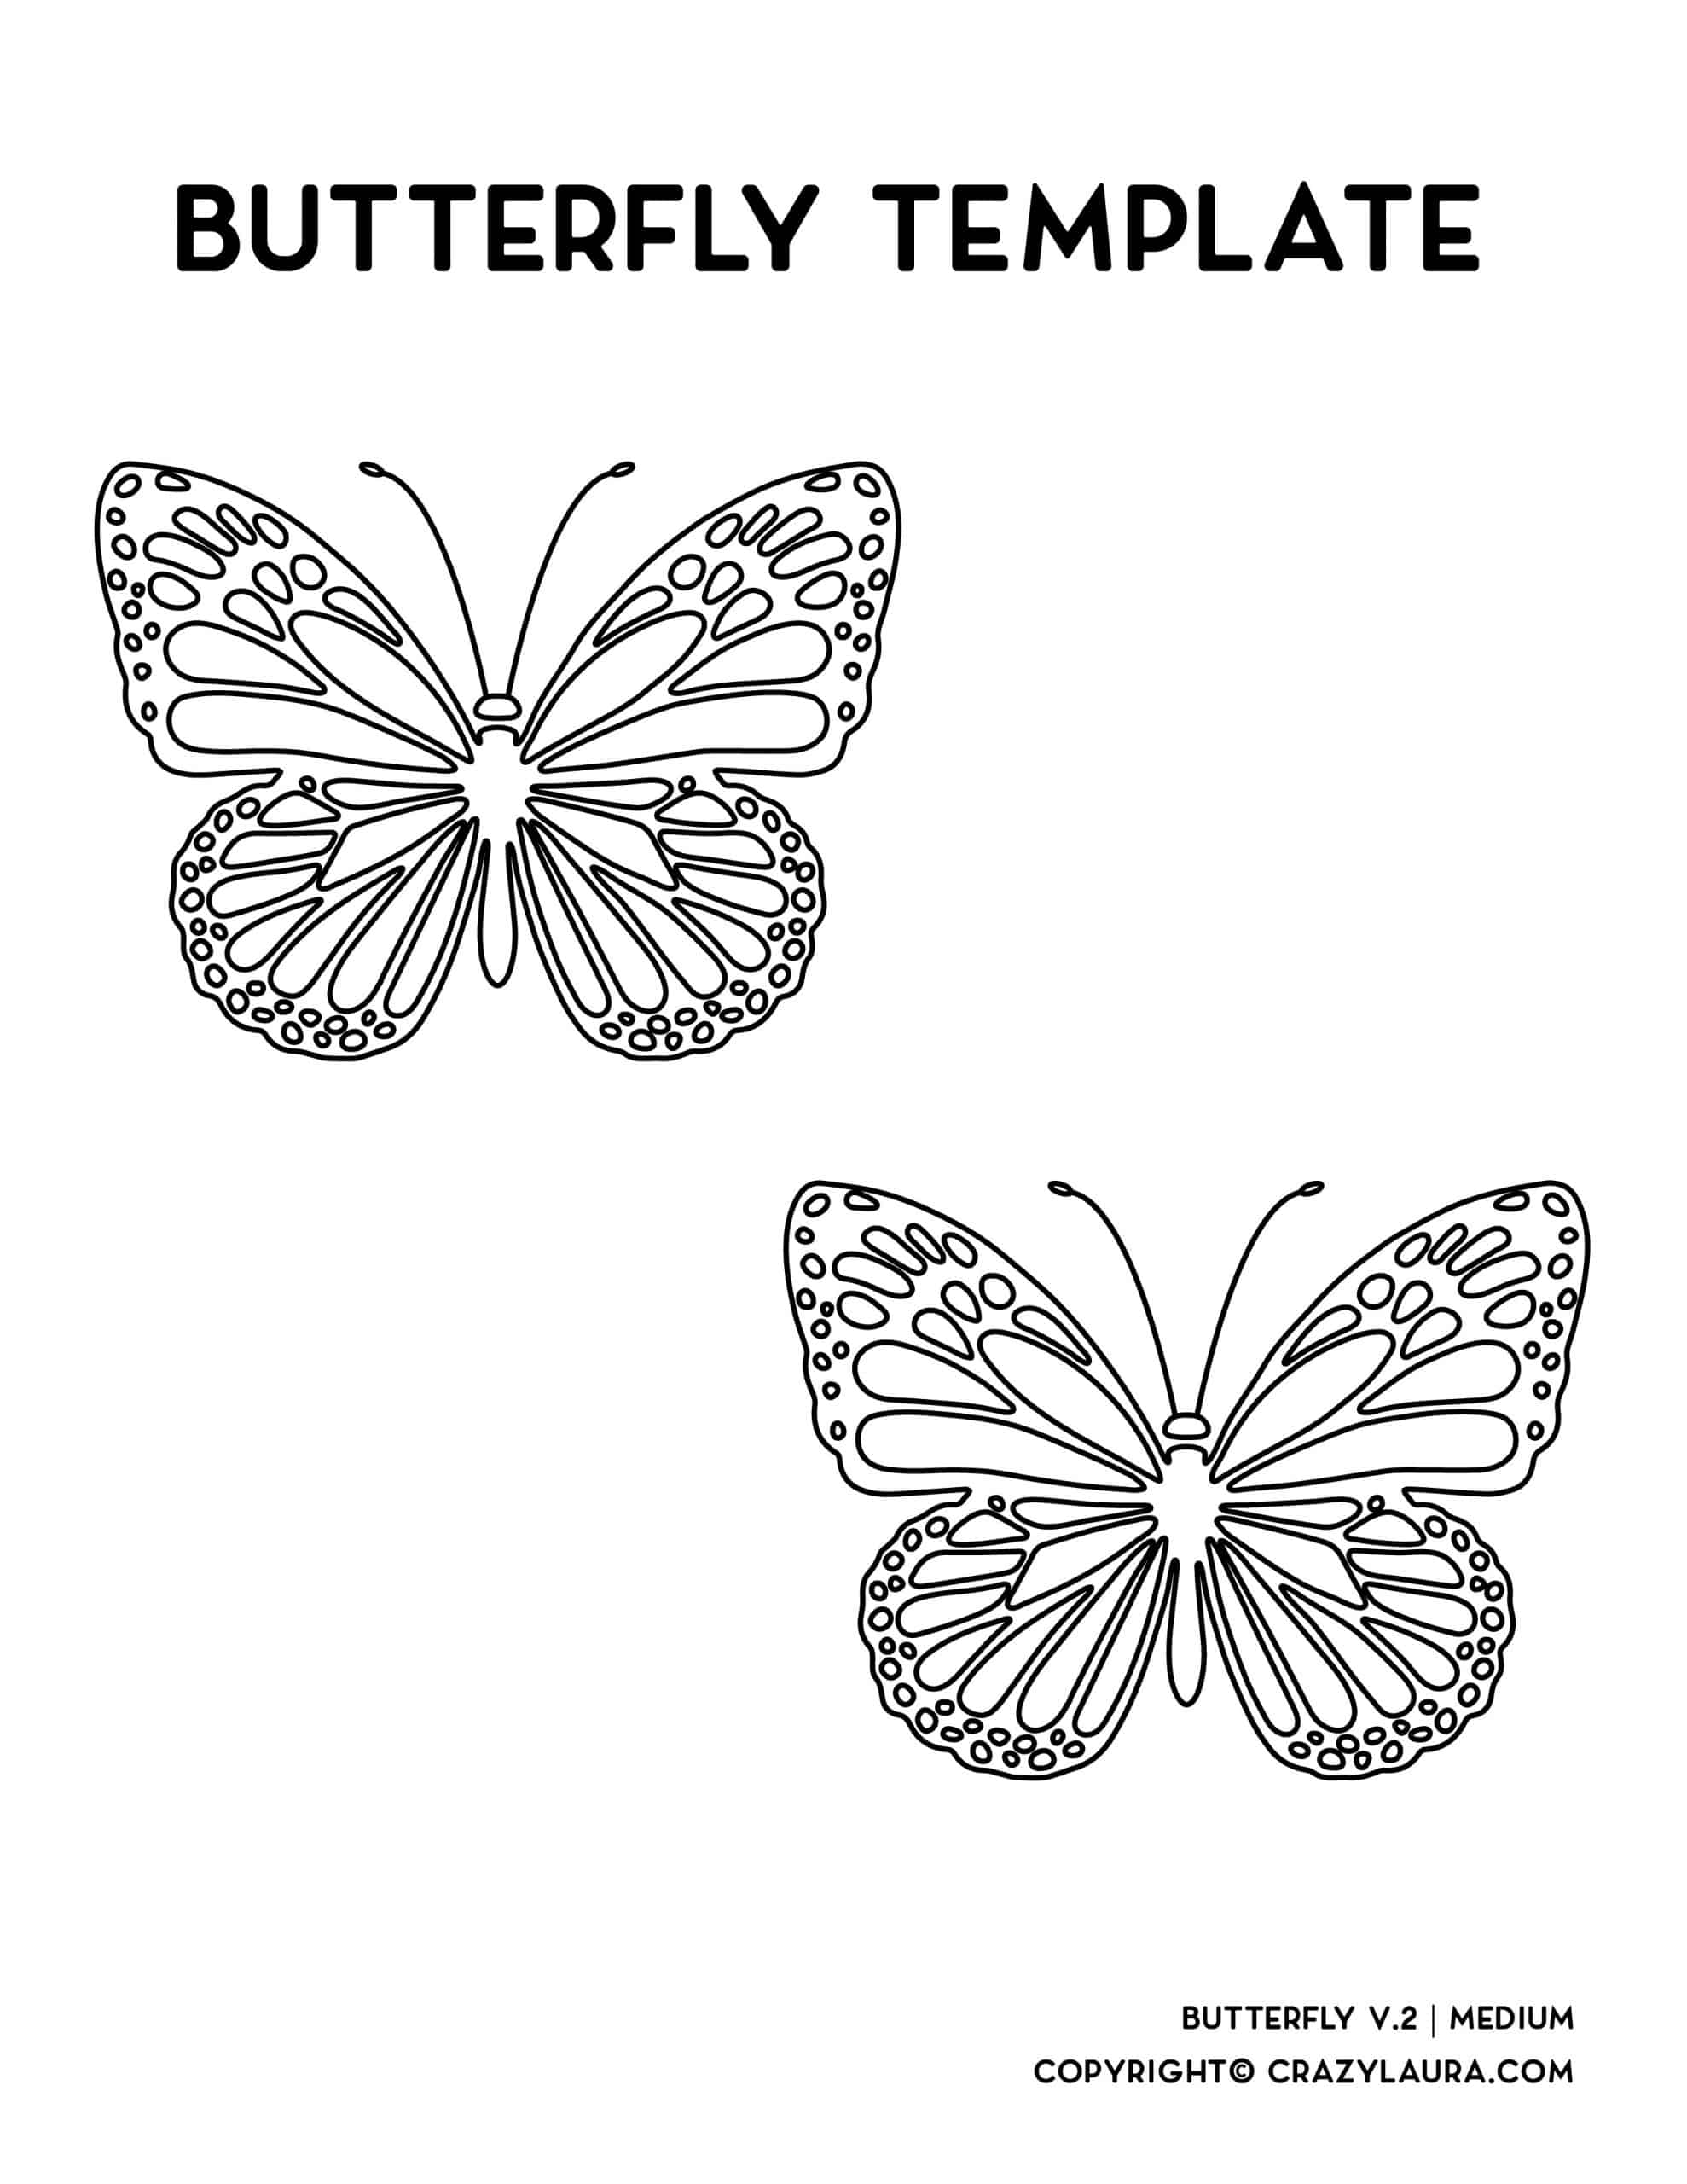 medium sized butterfly template printable